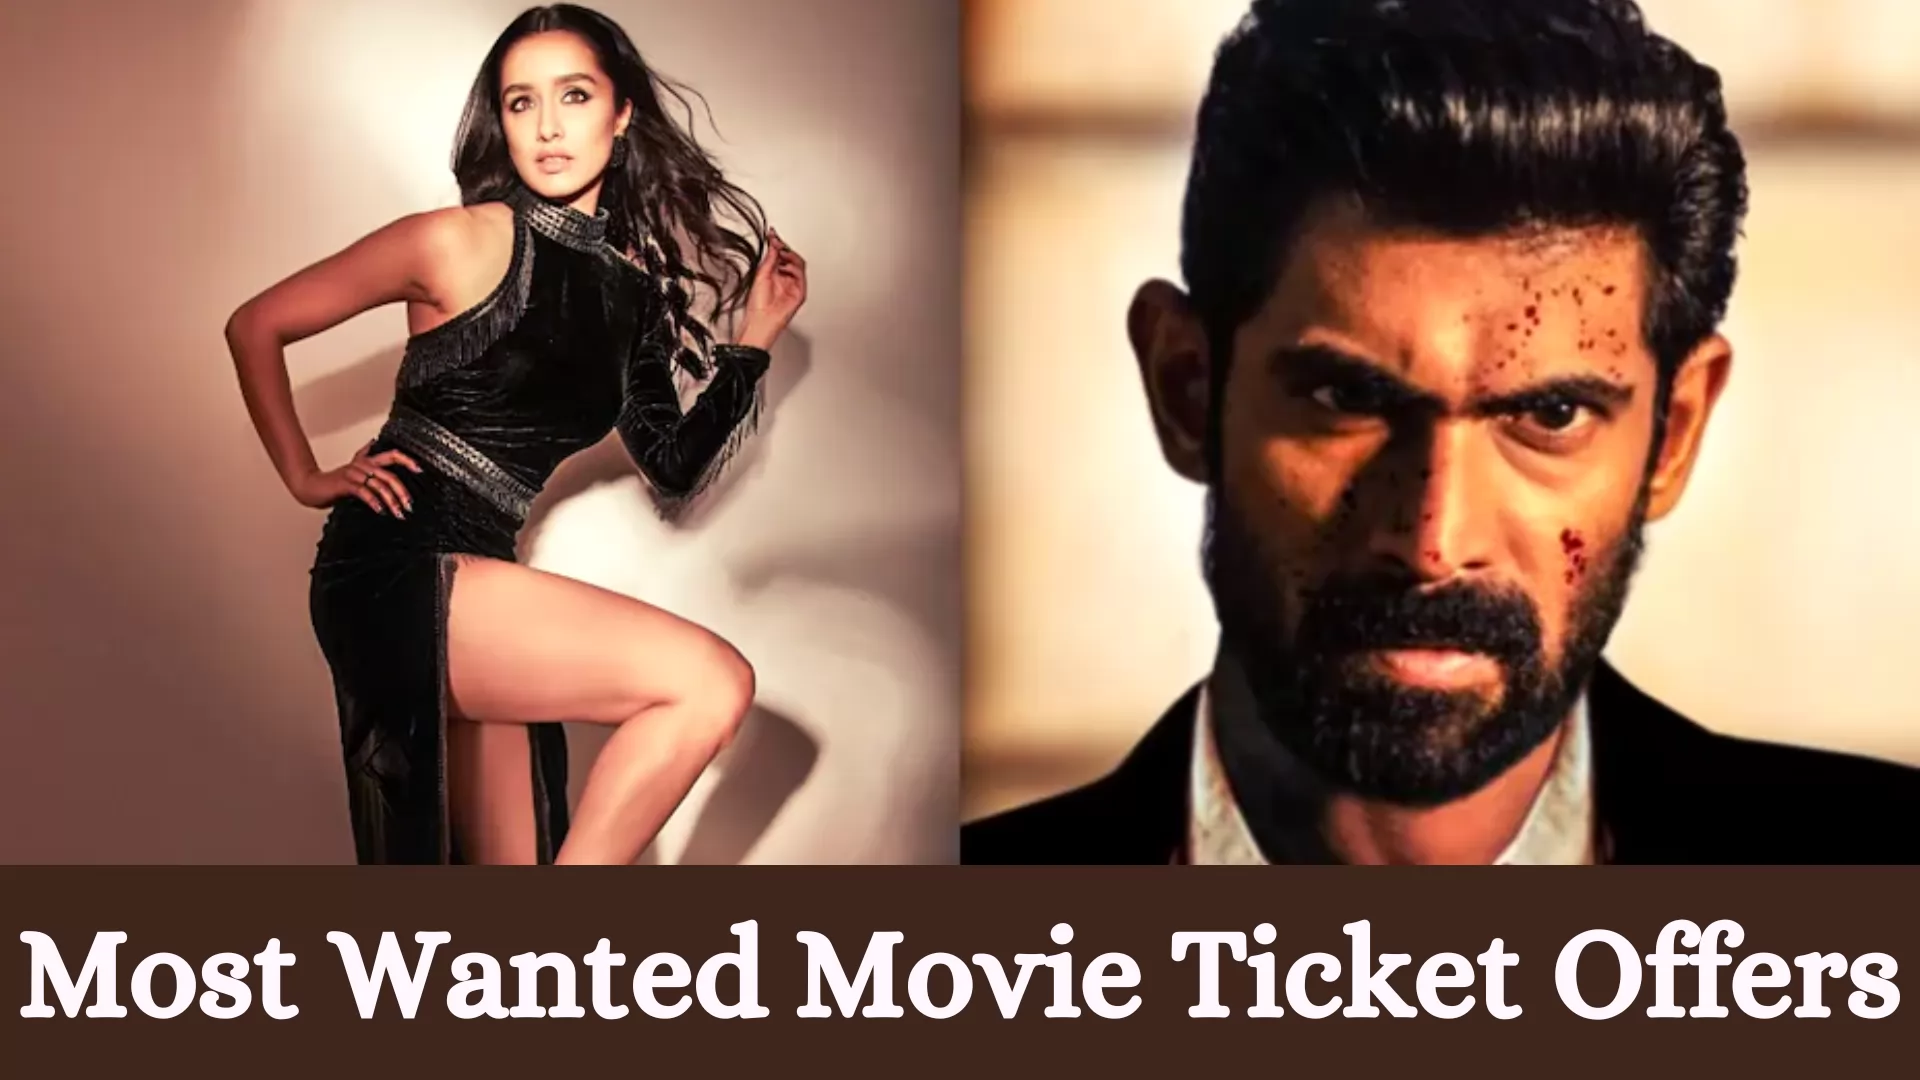 Most Wanted Movie Ticket Offers